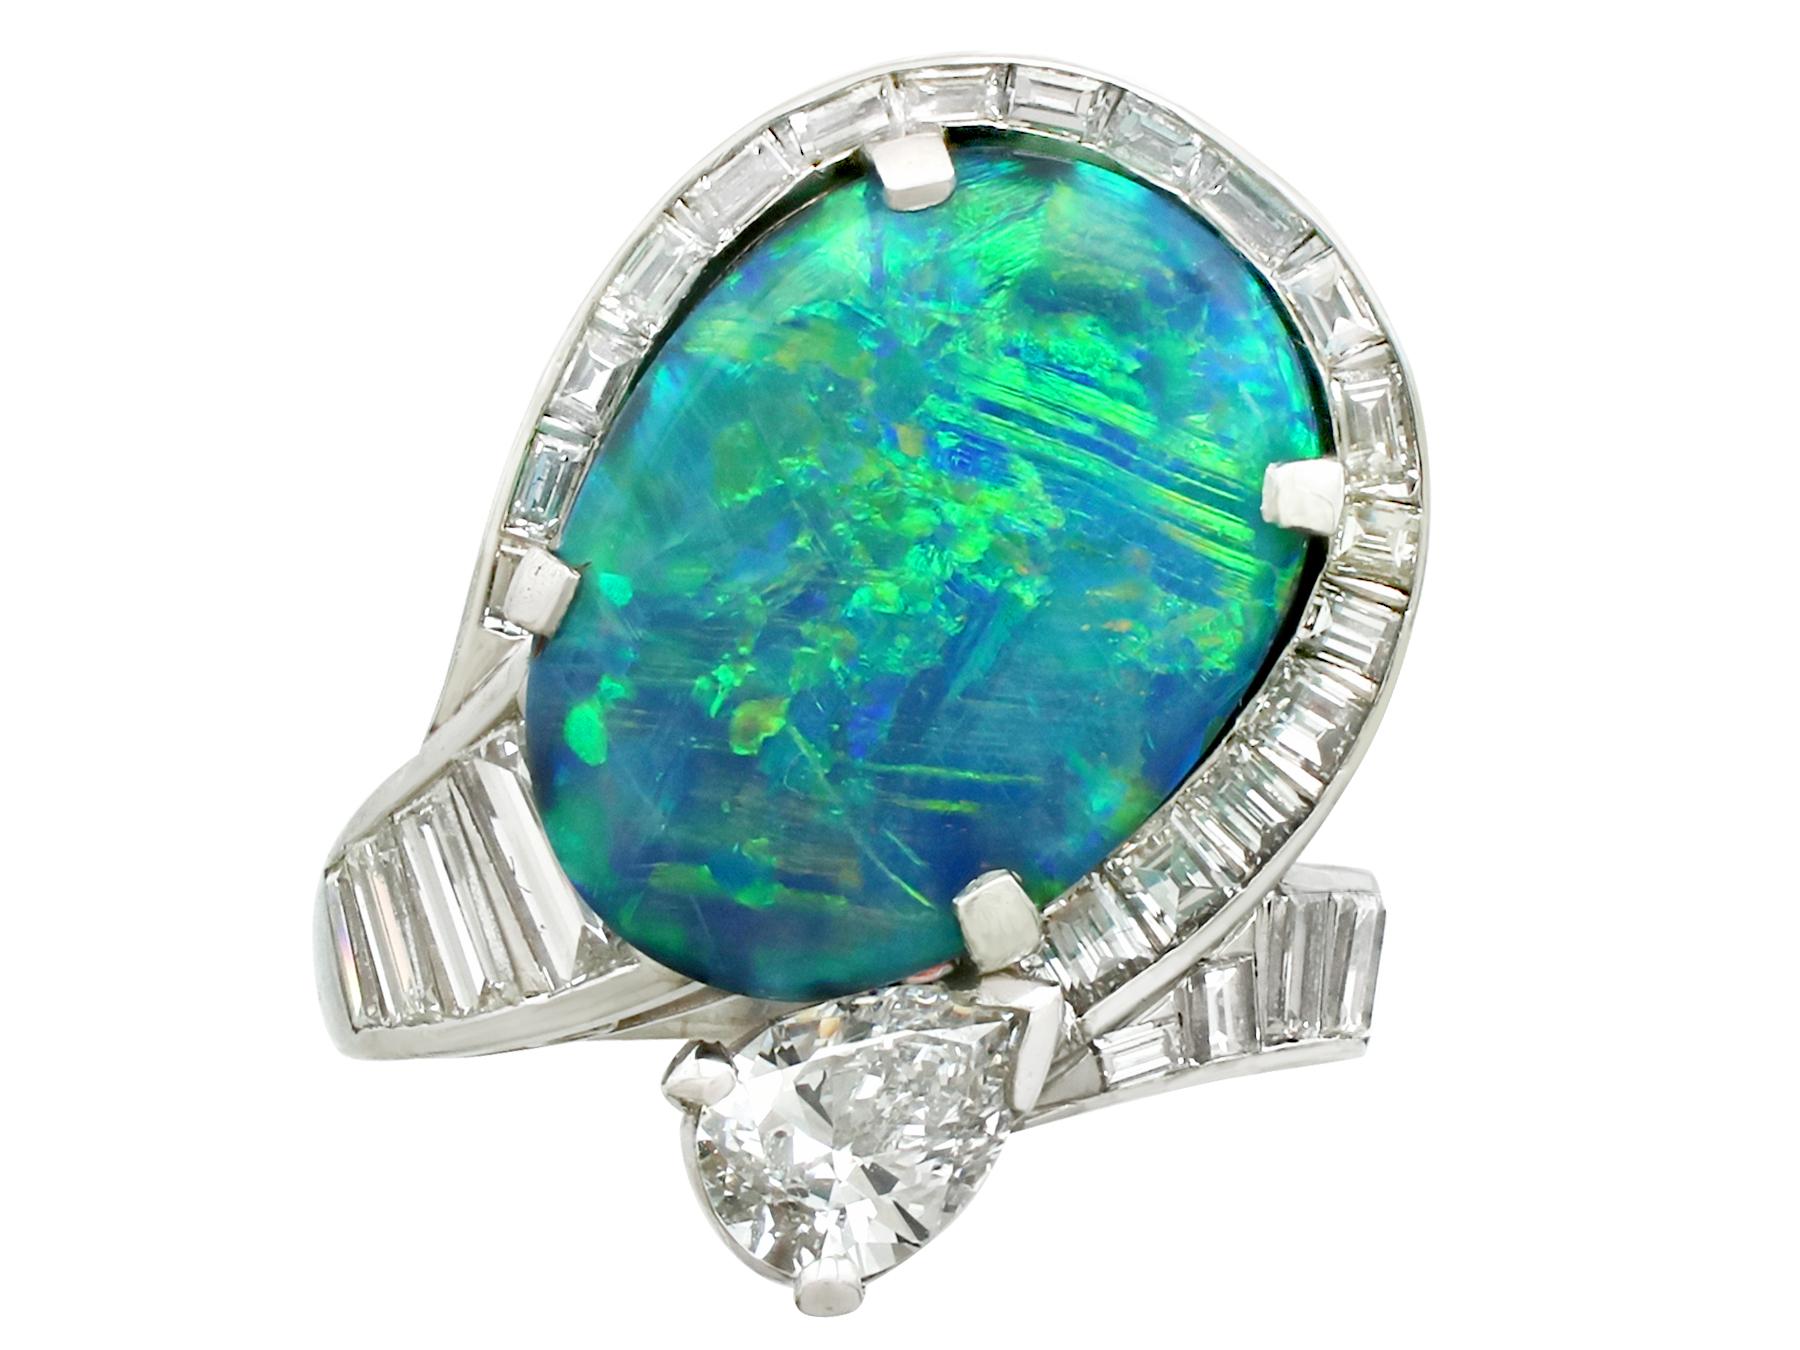 A stunning vintage 1950's 5.08 carat black opal and 2.49 carat diamond, platinum dress ring; part of our diverse opal jewellery and estate jewelry collections.

This stunning, fine and impressive large opal and diamond ring has been crafted in